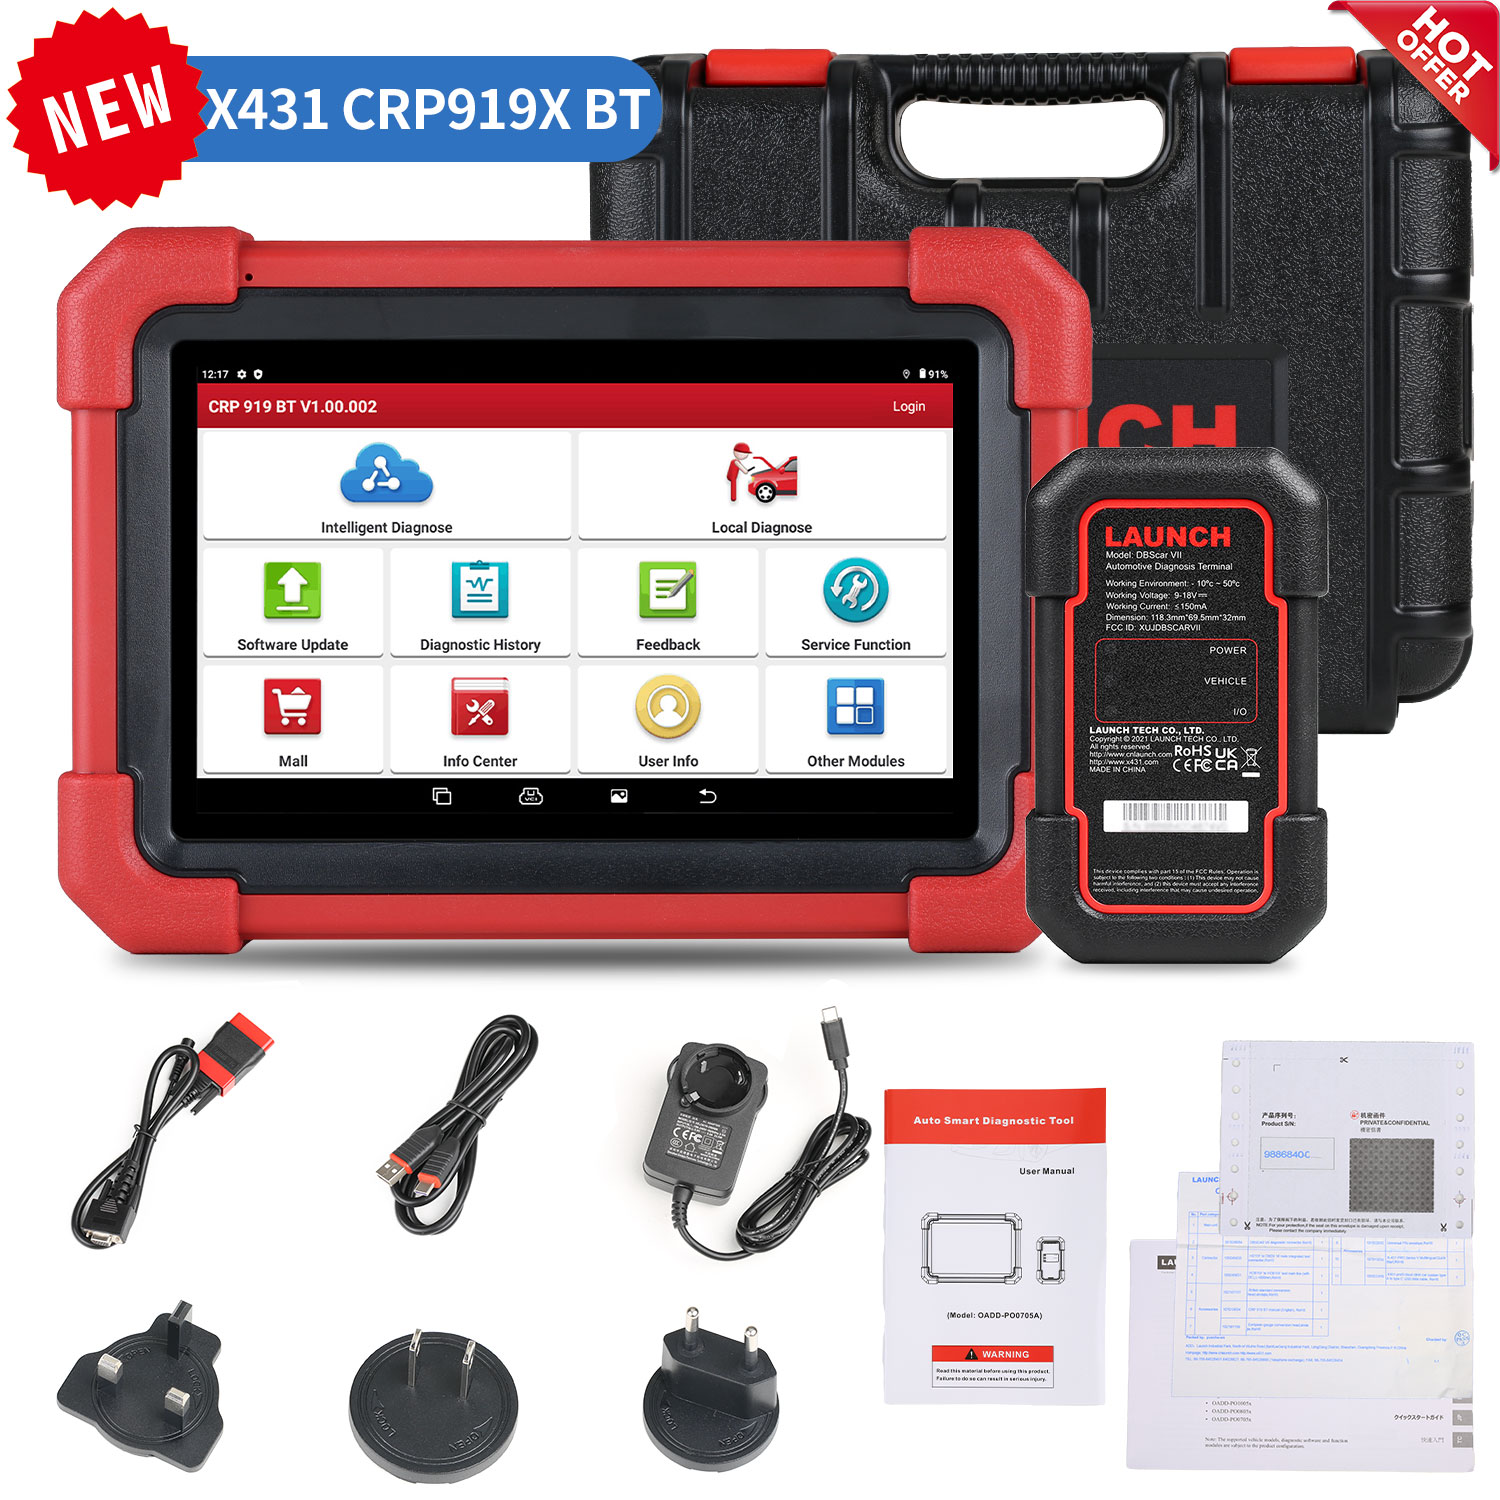 V519 OBD2 Scanner, Classic Enhanced Mode 6 Engine Fault Code Reader OBDII  CAN Diagnostic Scan Tool, One-Click Smog Check, DTC Lookup. 